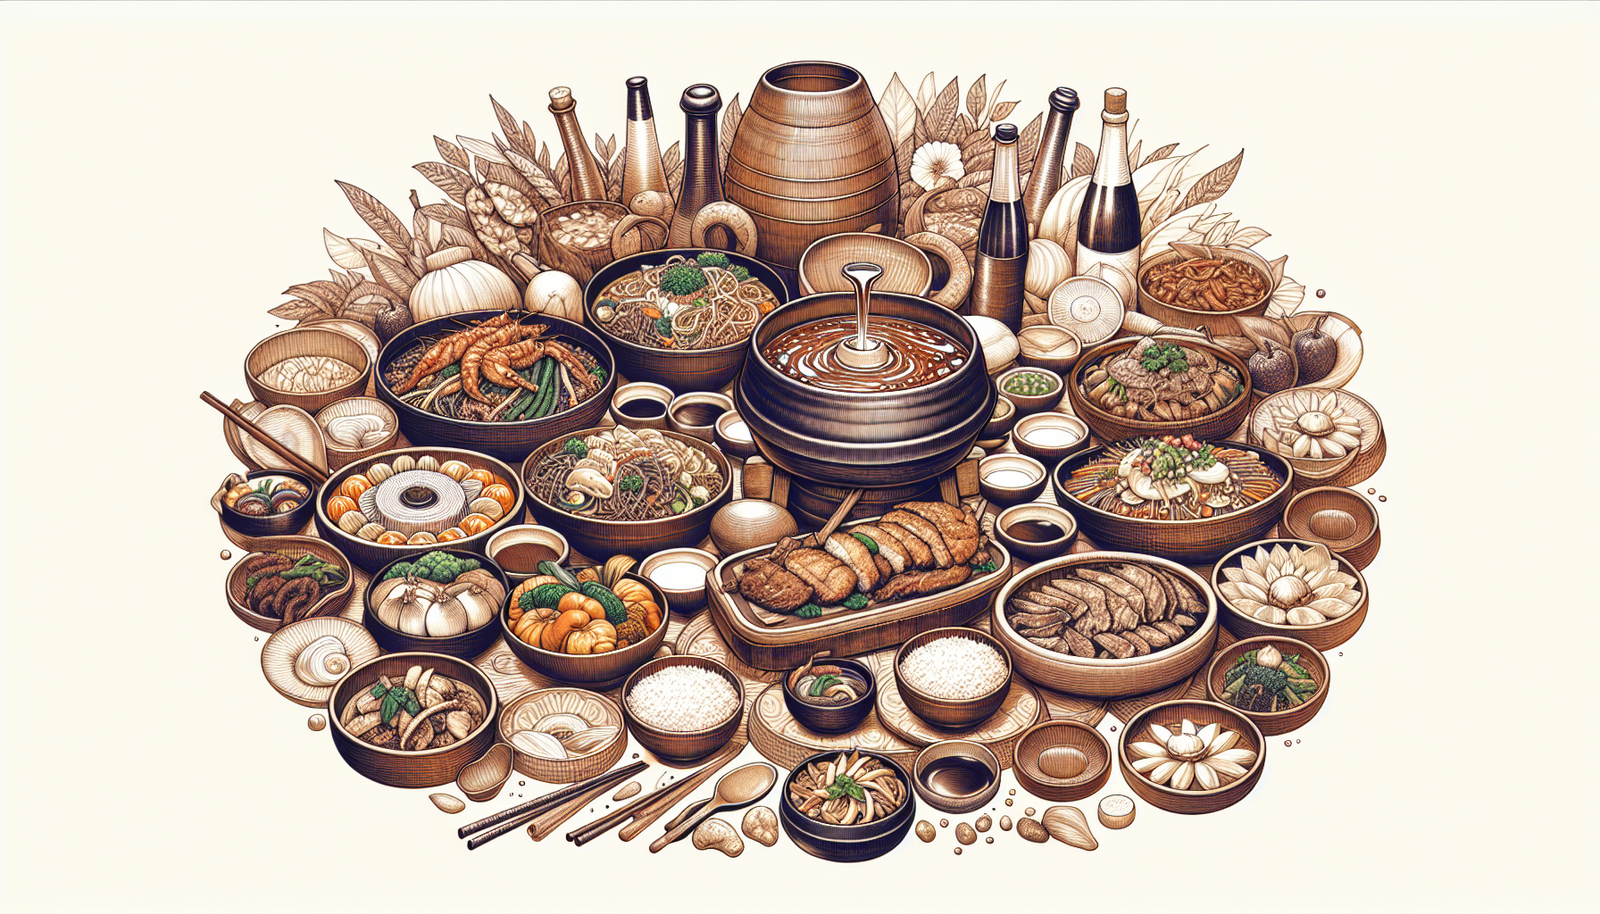 What Are Some Famous Historical Korean Recipes That Have Stood The Test Of Time?